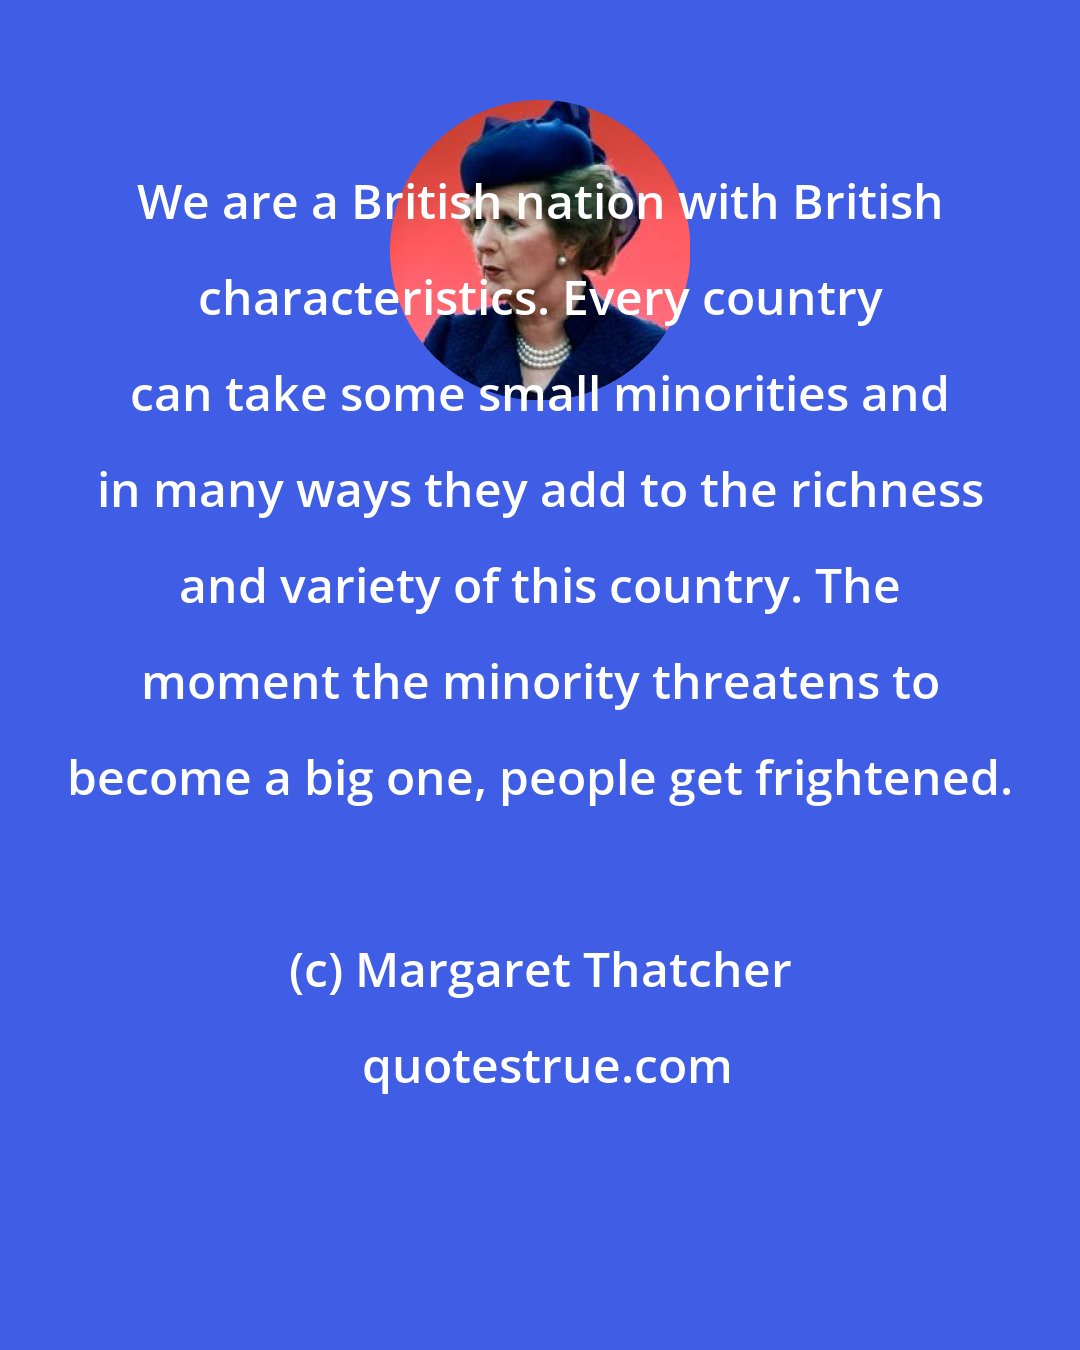 Margaret Thatcher: We are a British nation with British characteristics. Every country can take some small minorities and in many ways they add to the richness and variety of this country. The moment the minority threatens to become a big one, people get frightened.